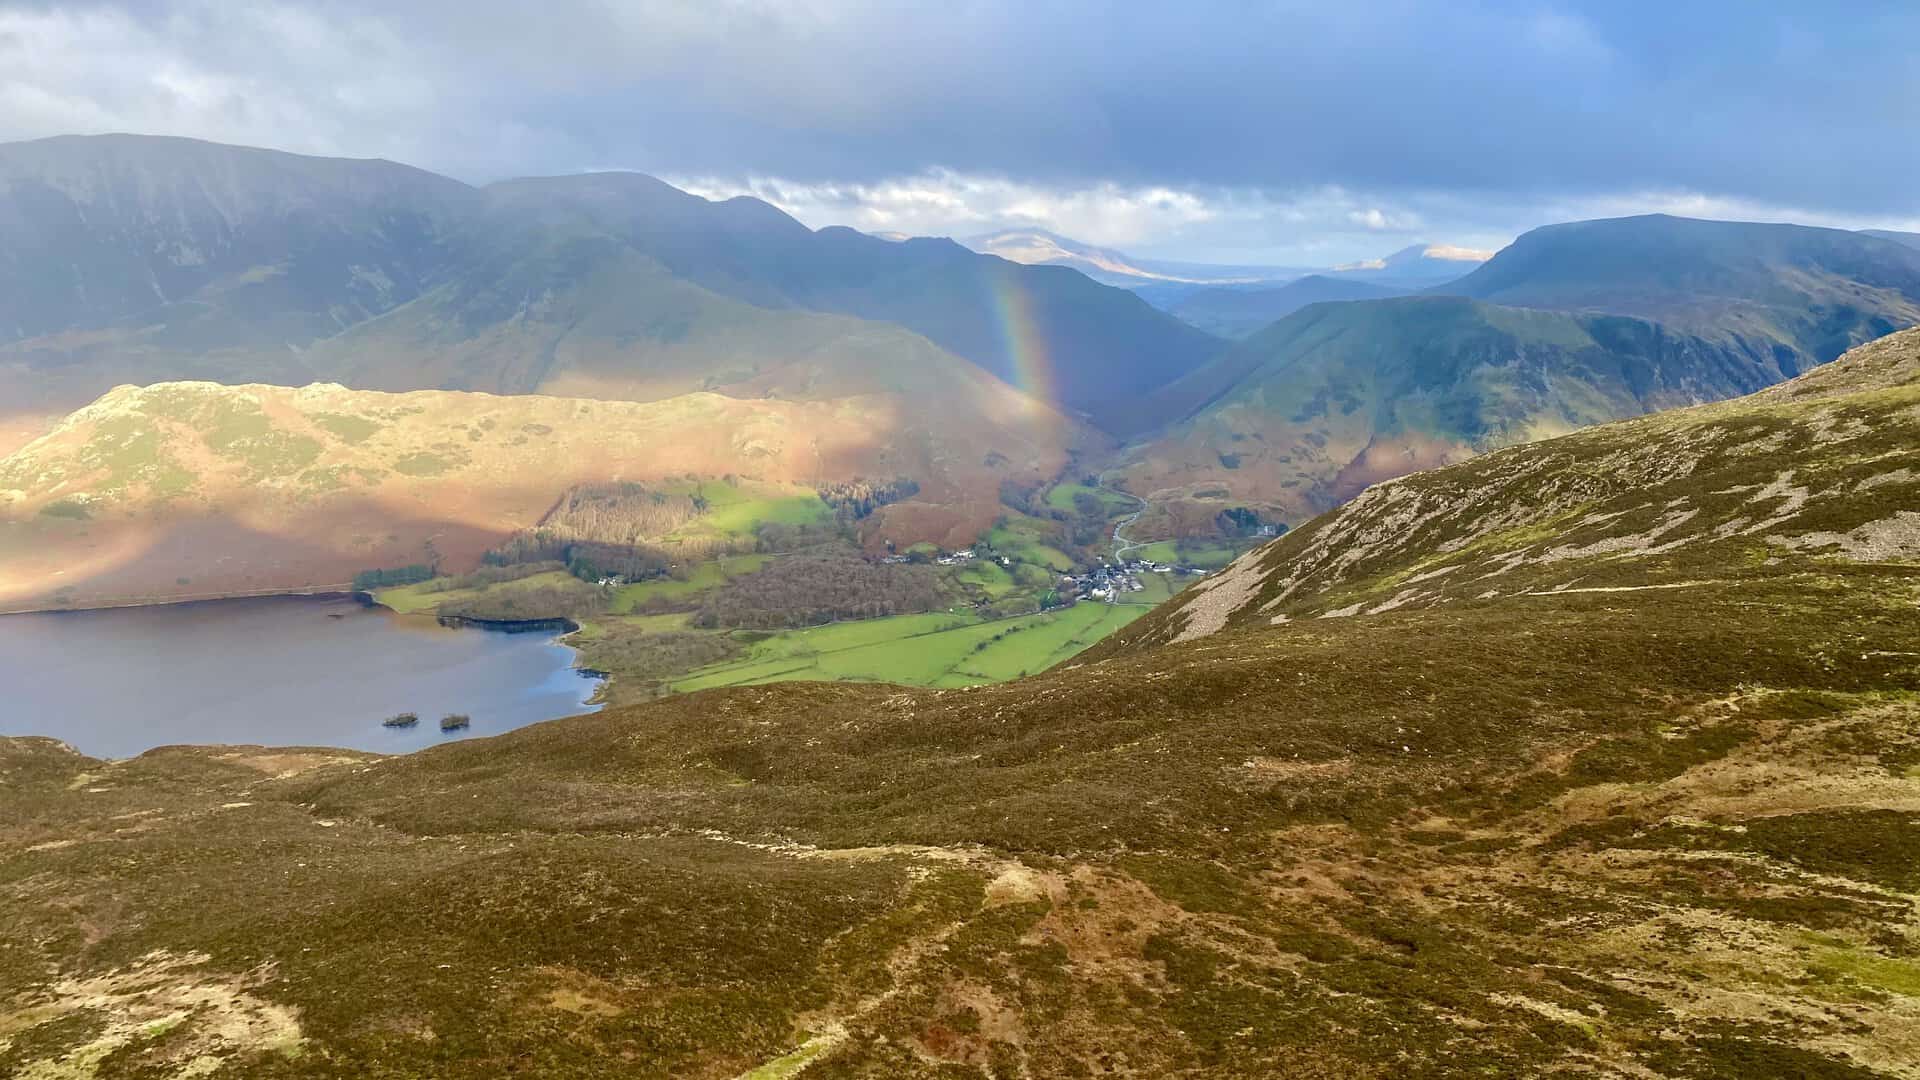 The sun lights up Rannerdale Knotts and a rainbow appears above Buttermere (the village).